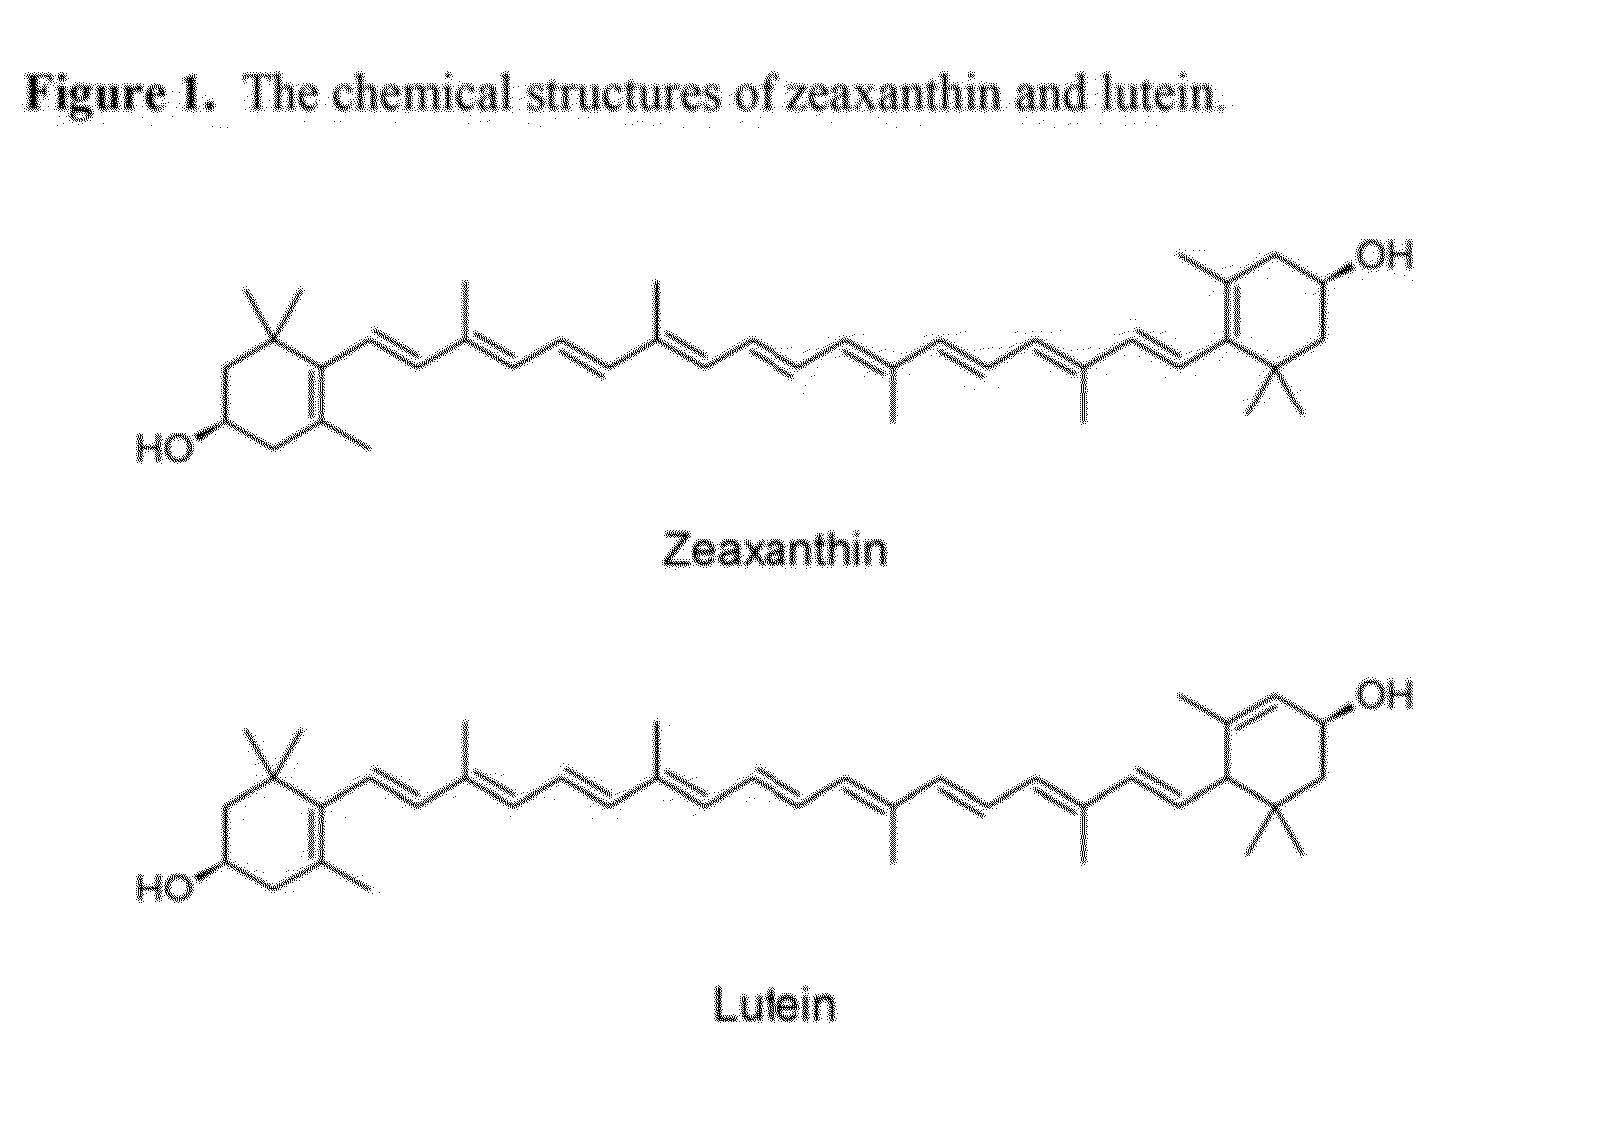 Methods of saponifying xanthophyll esters and isolating xanthophylls